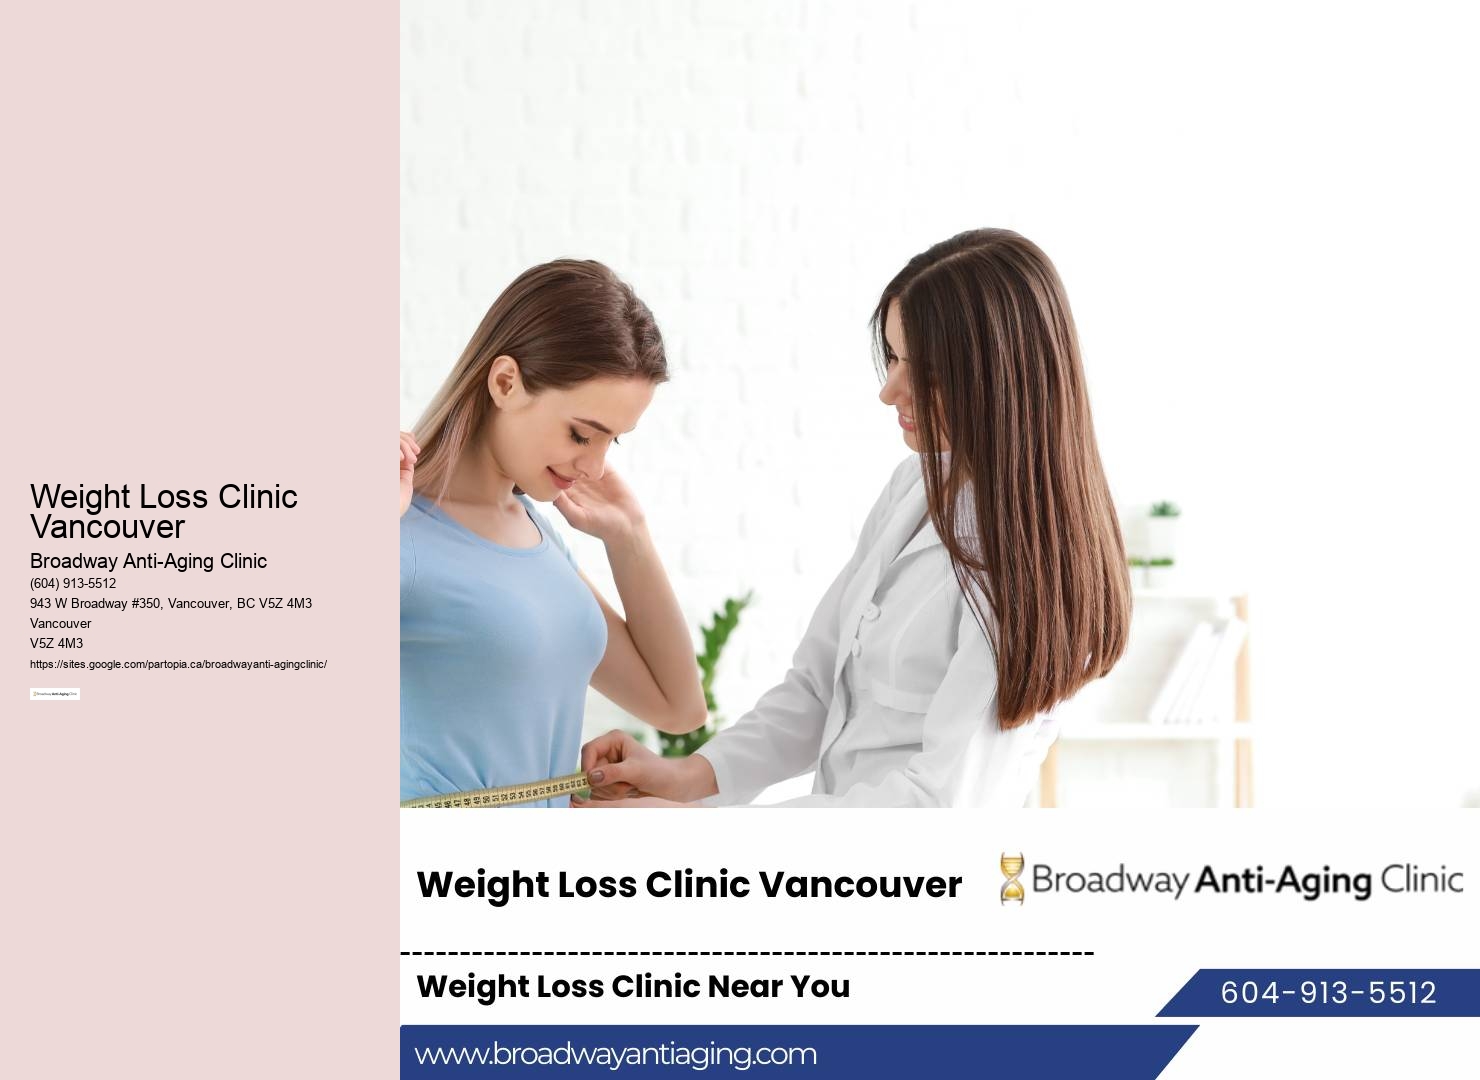 Weight Loss Clinic Vancouver